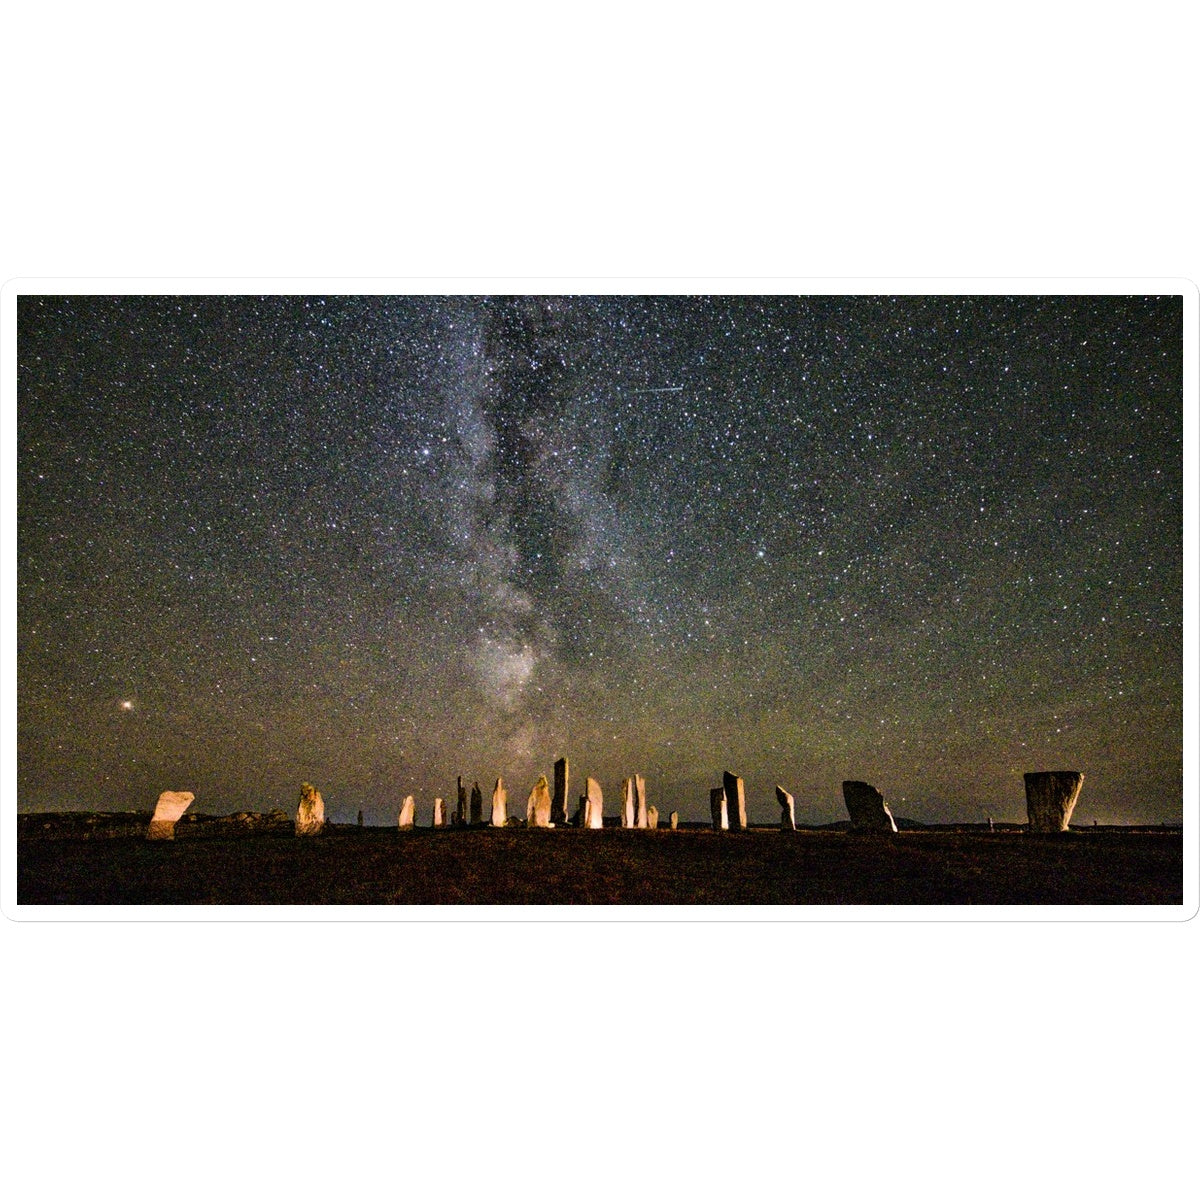 Callanish and the Milky Way  Sticker